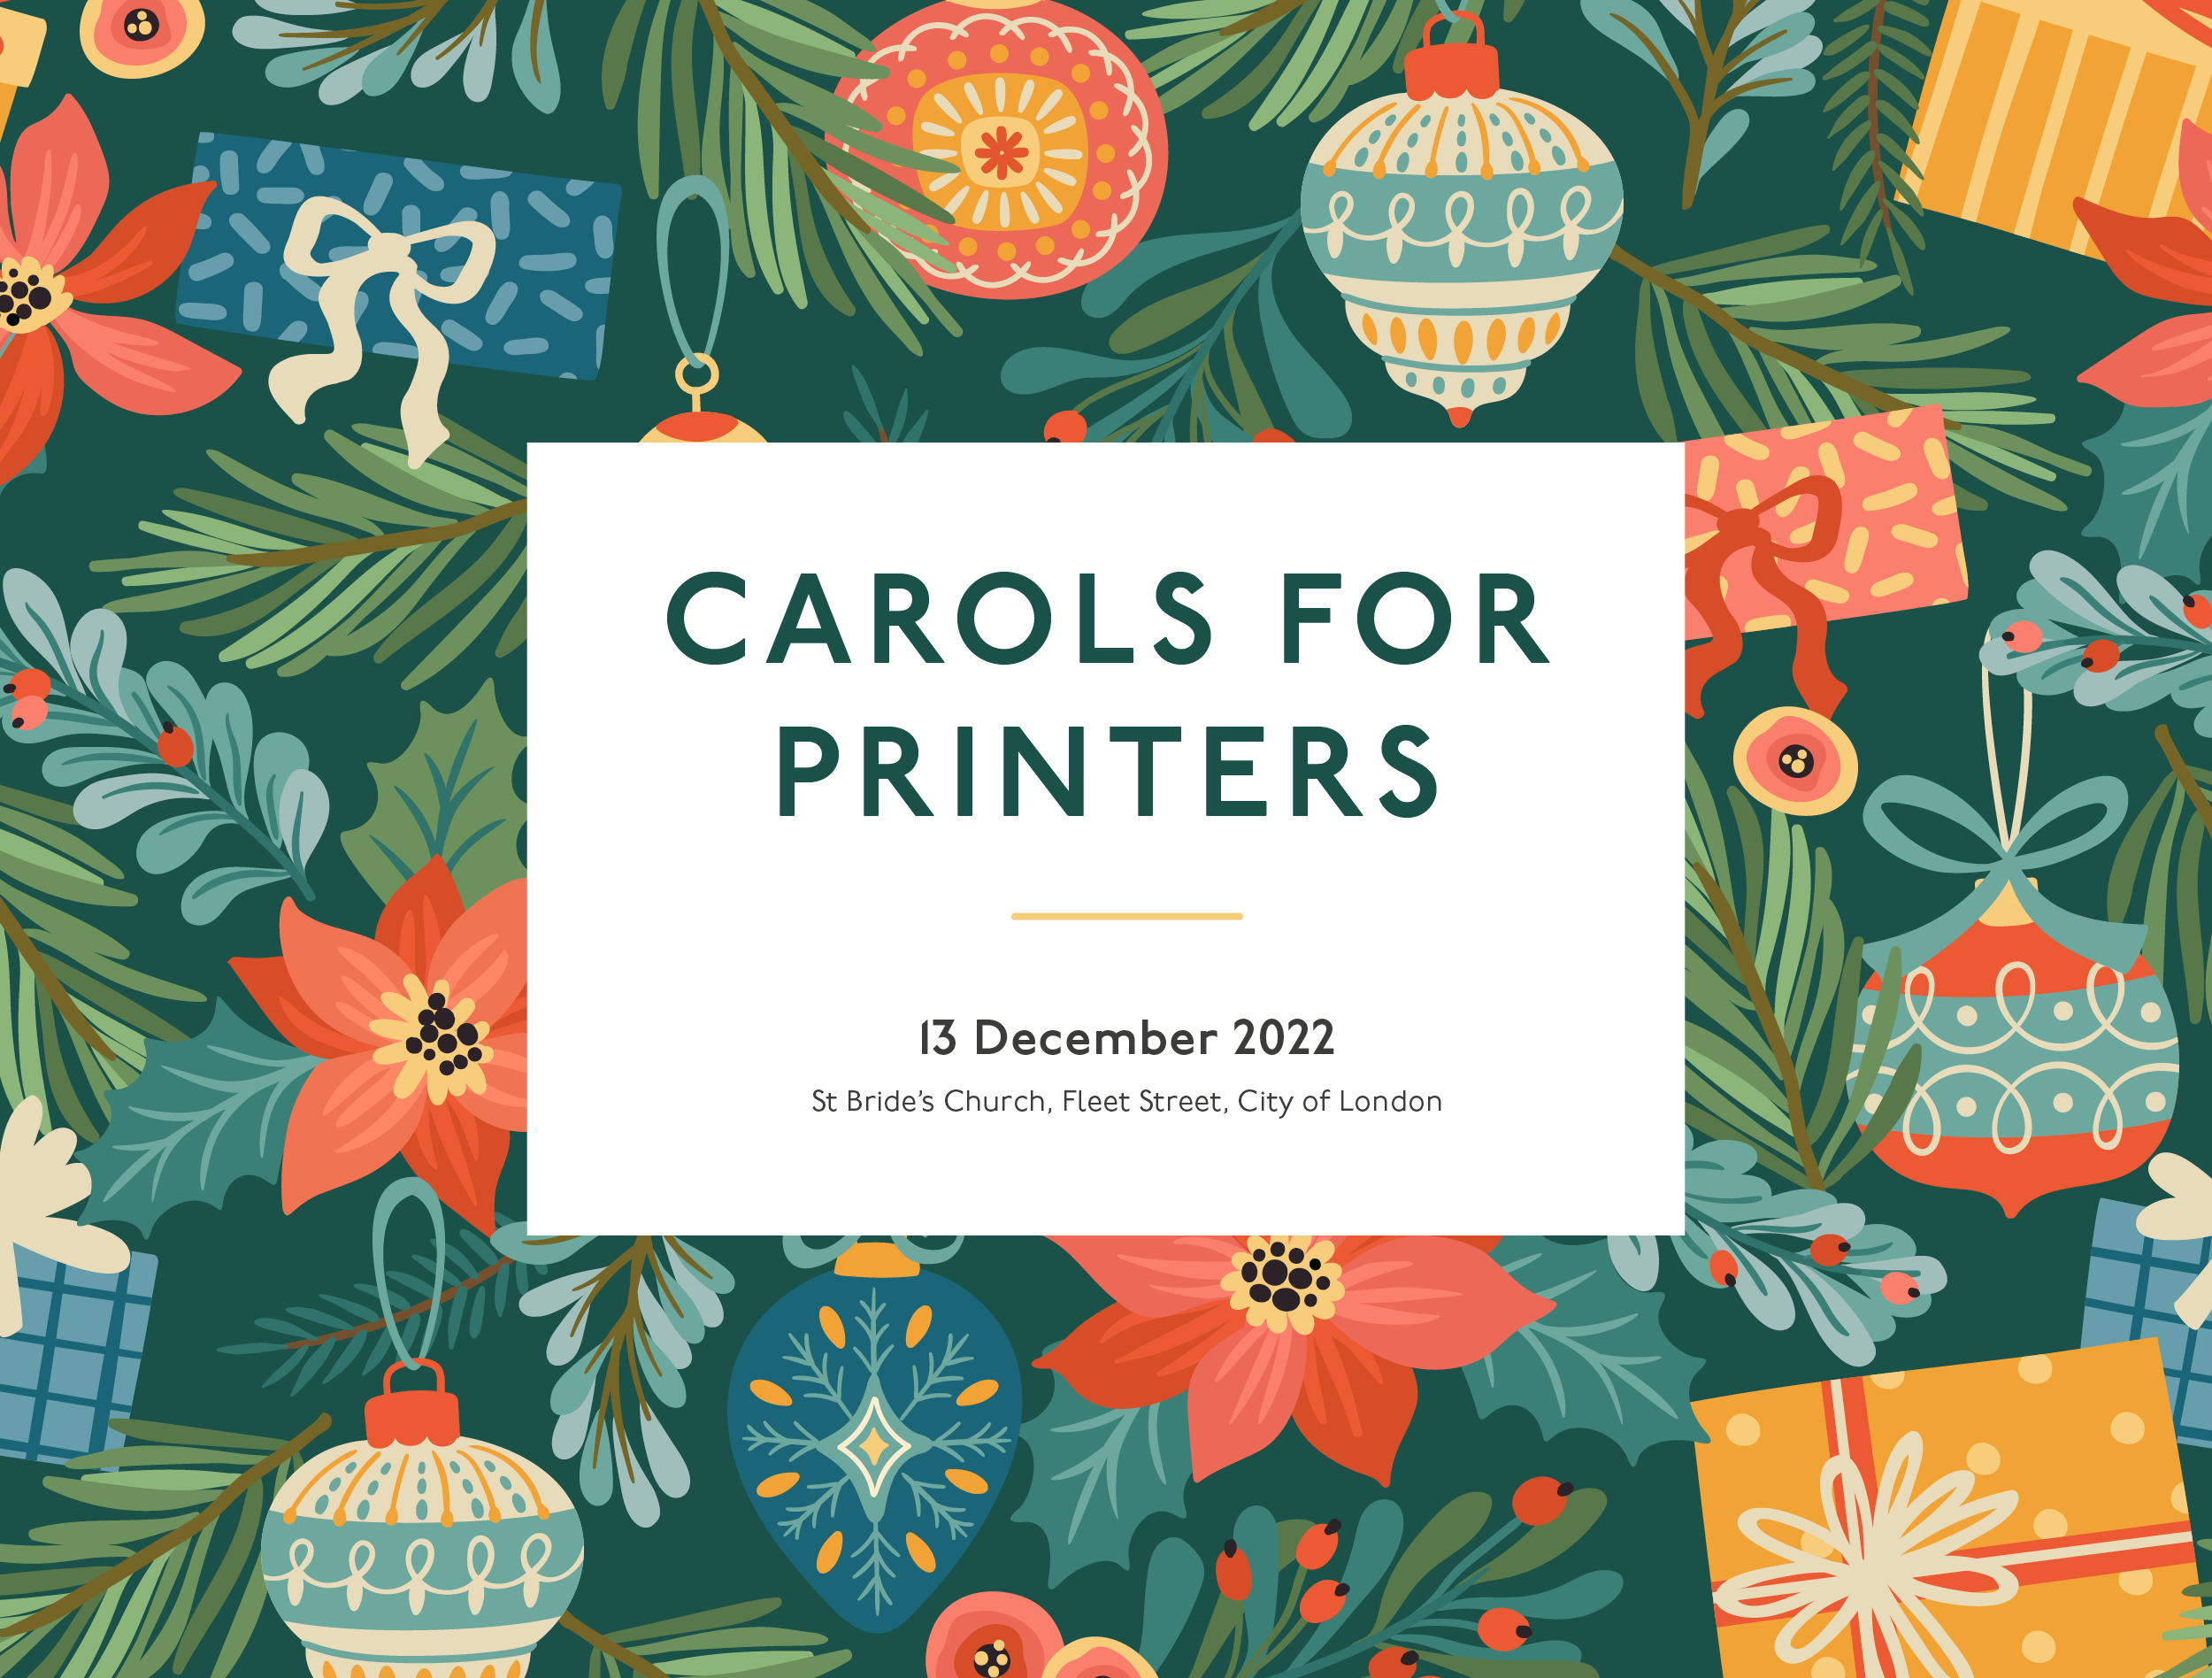 Join us for Carols & Networking